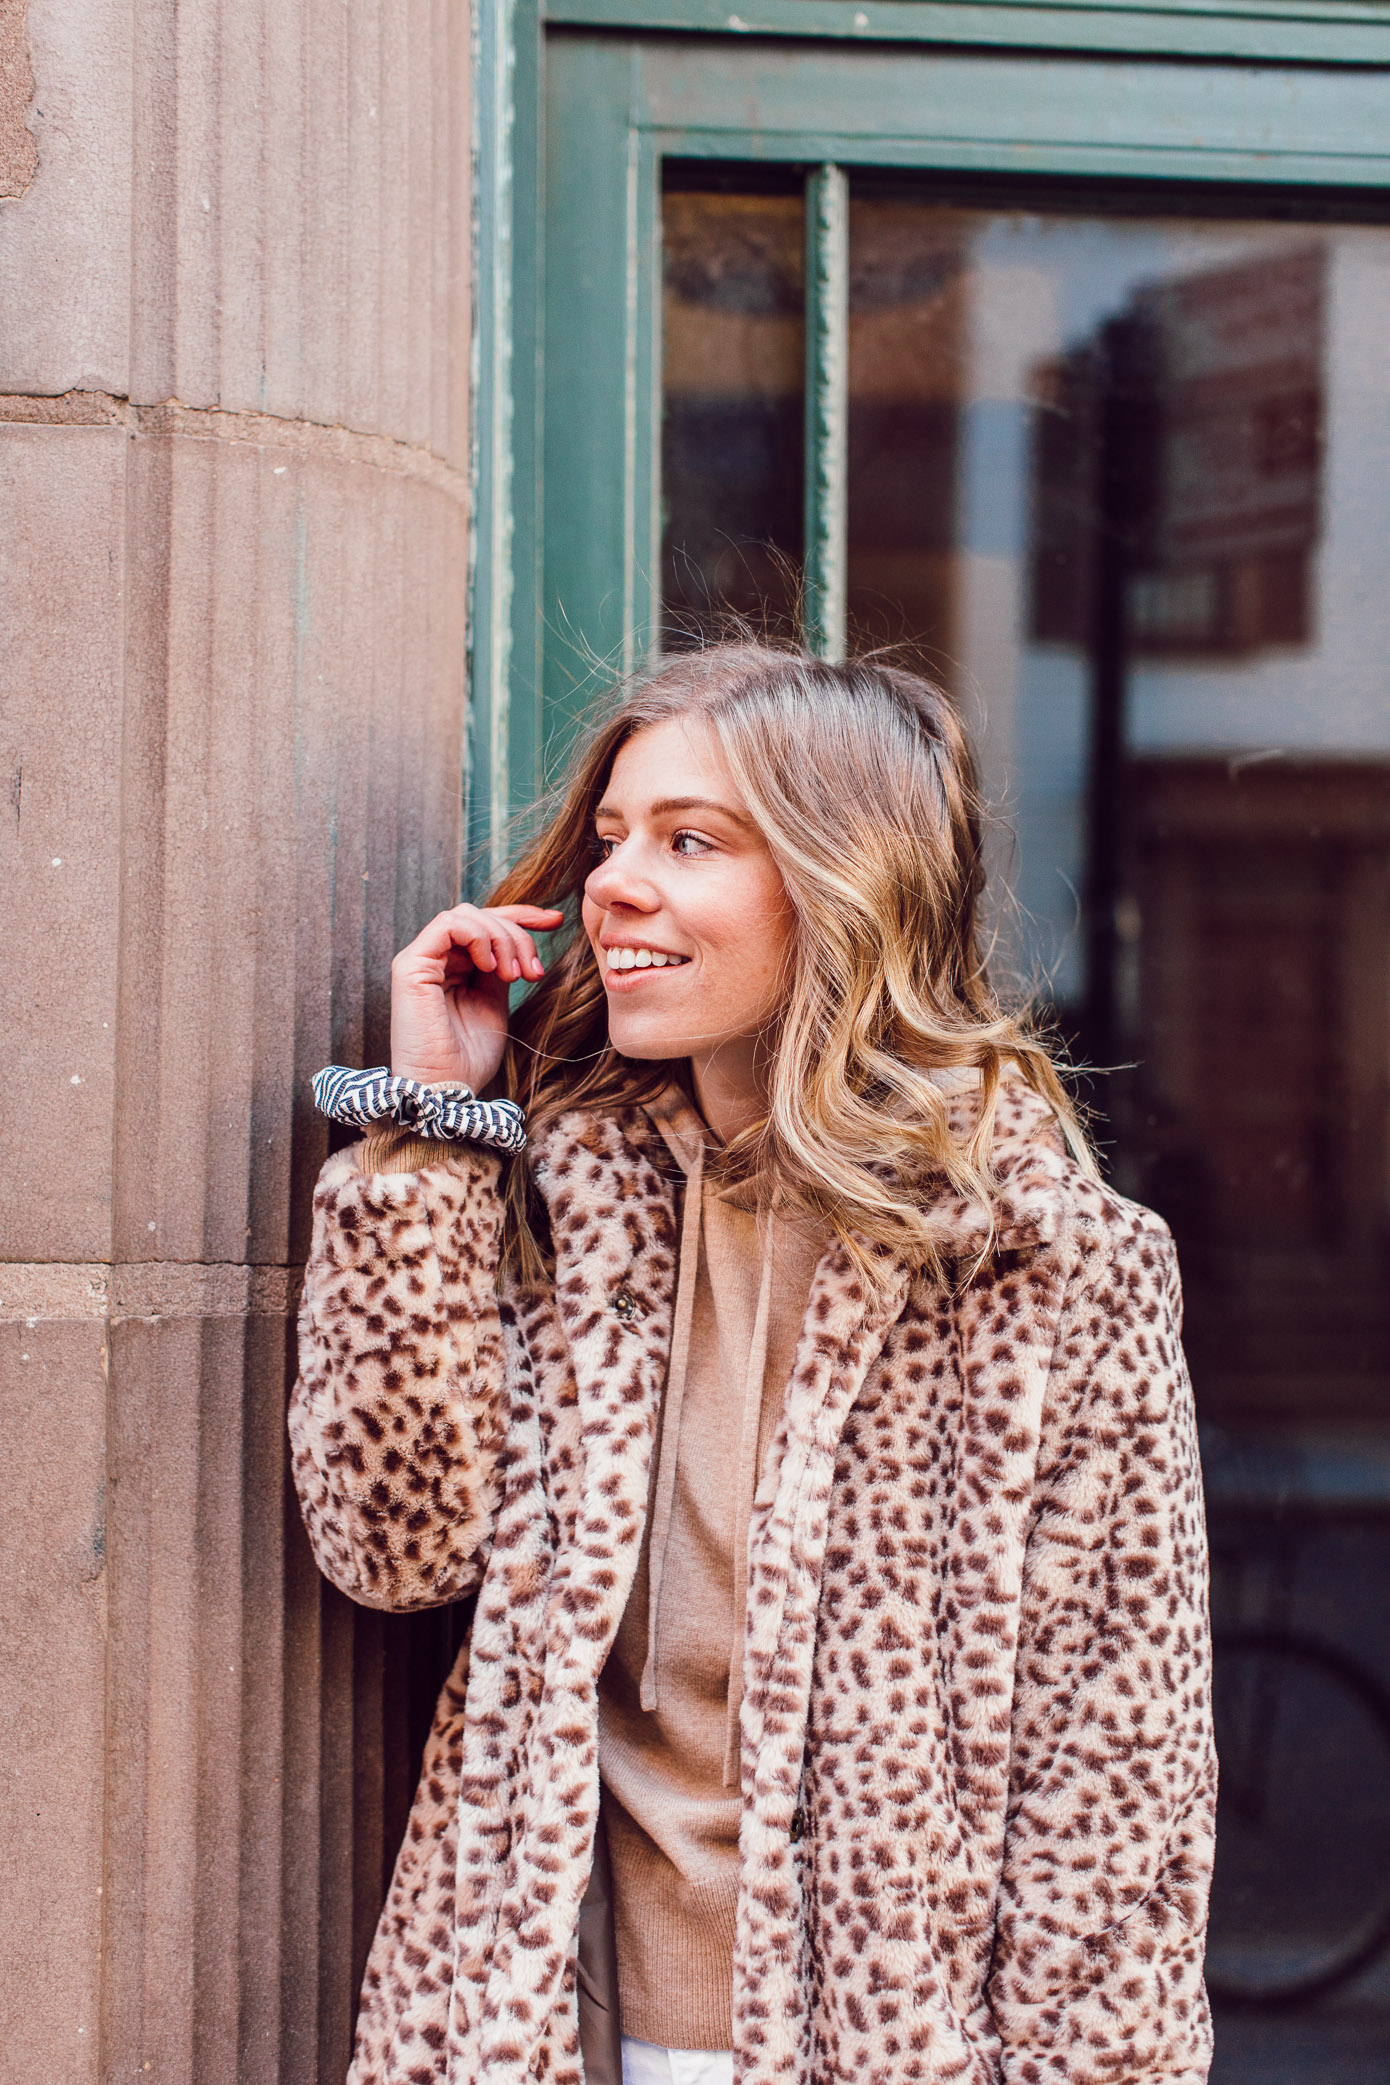 Leopard Faux Fur Coat, Cashmere Hoodie | Casual Travel Style featured on Louella Reese